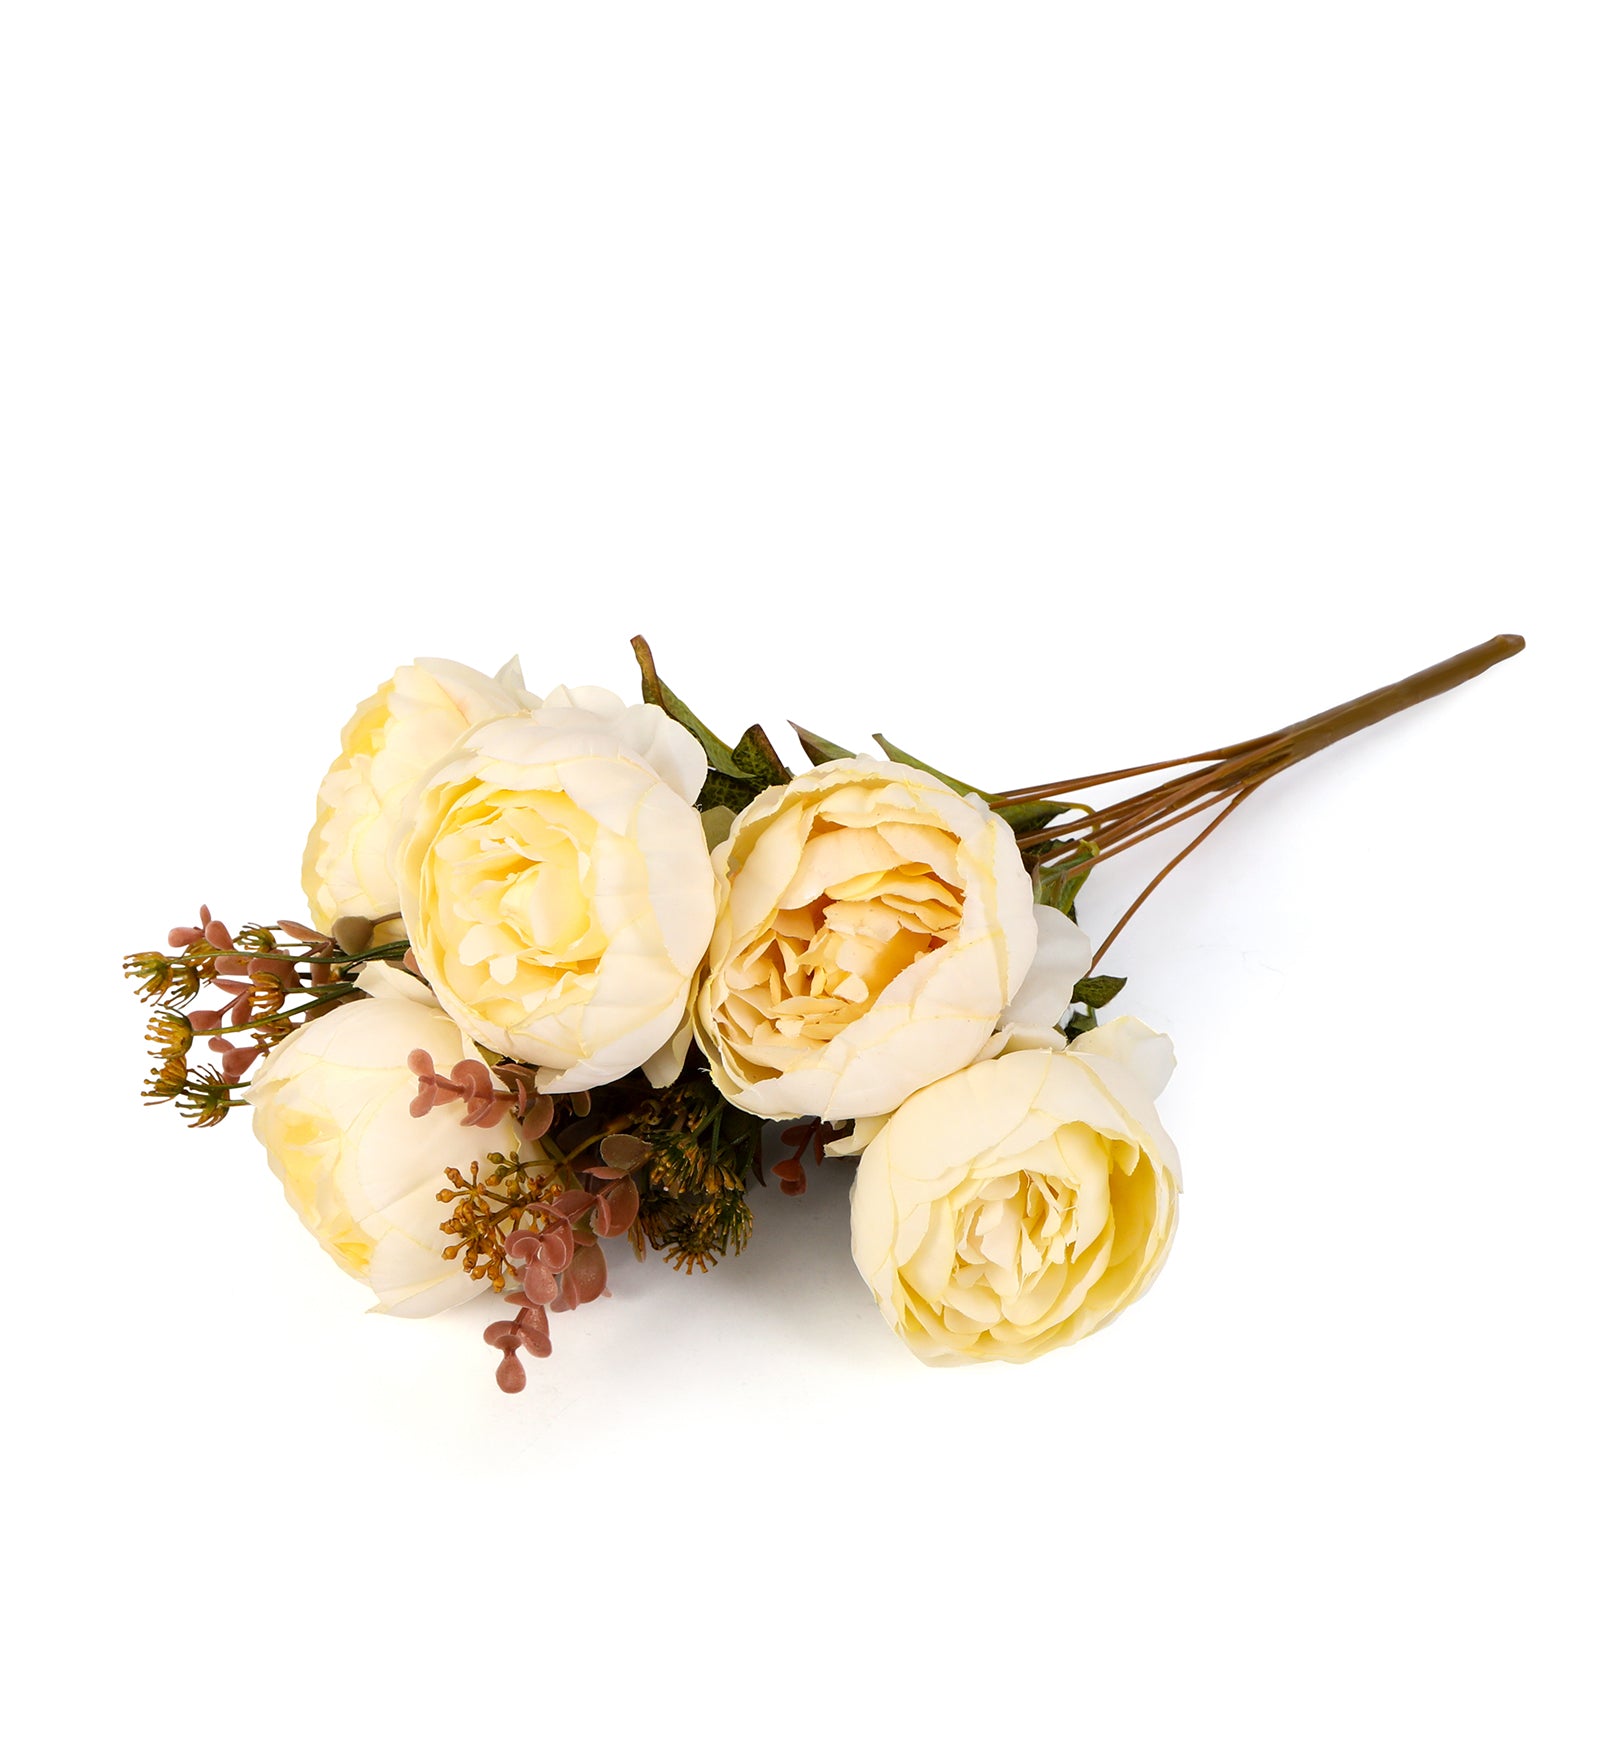 Flower Bunch - Peony White 3- The Home Co.